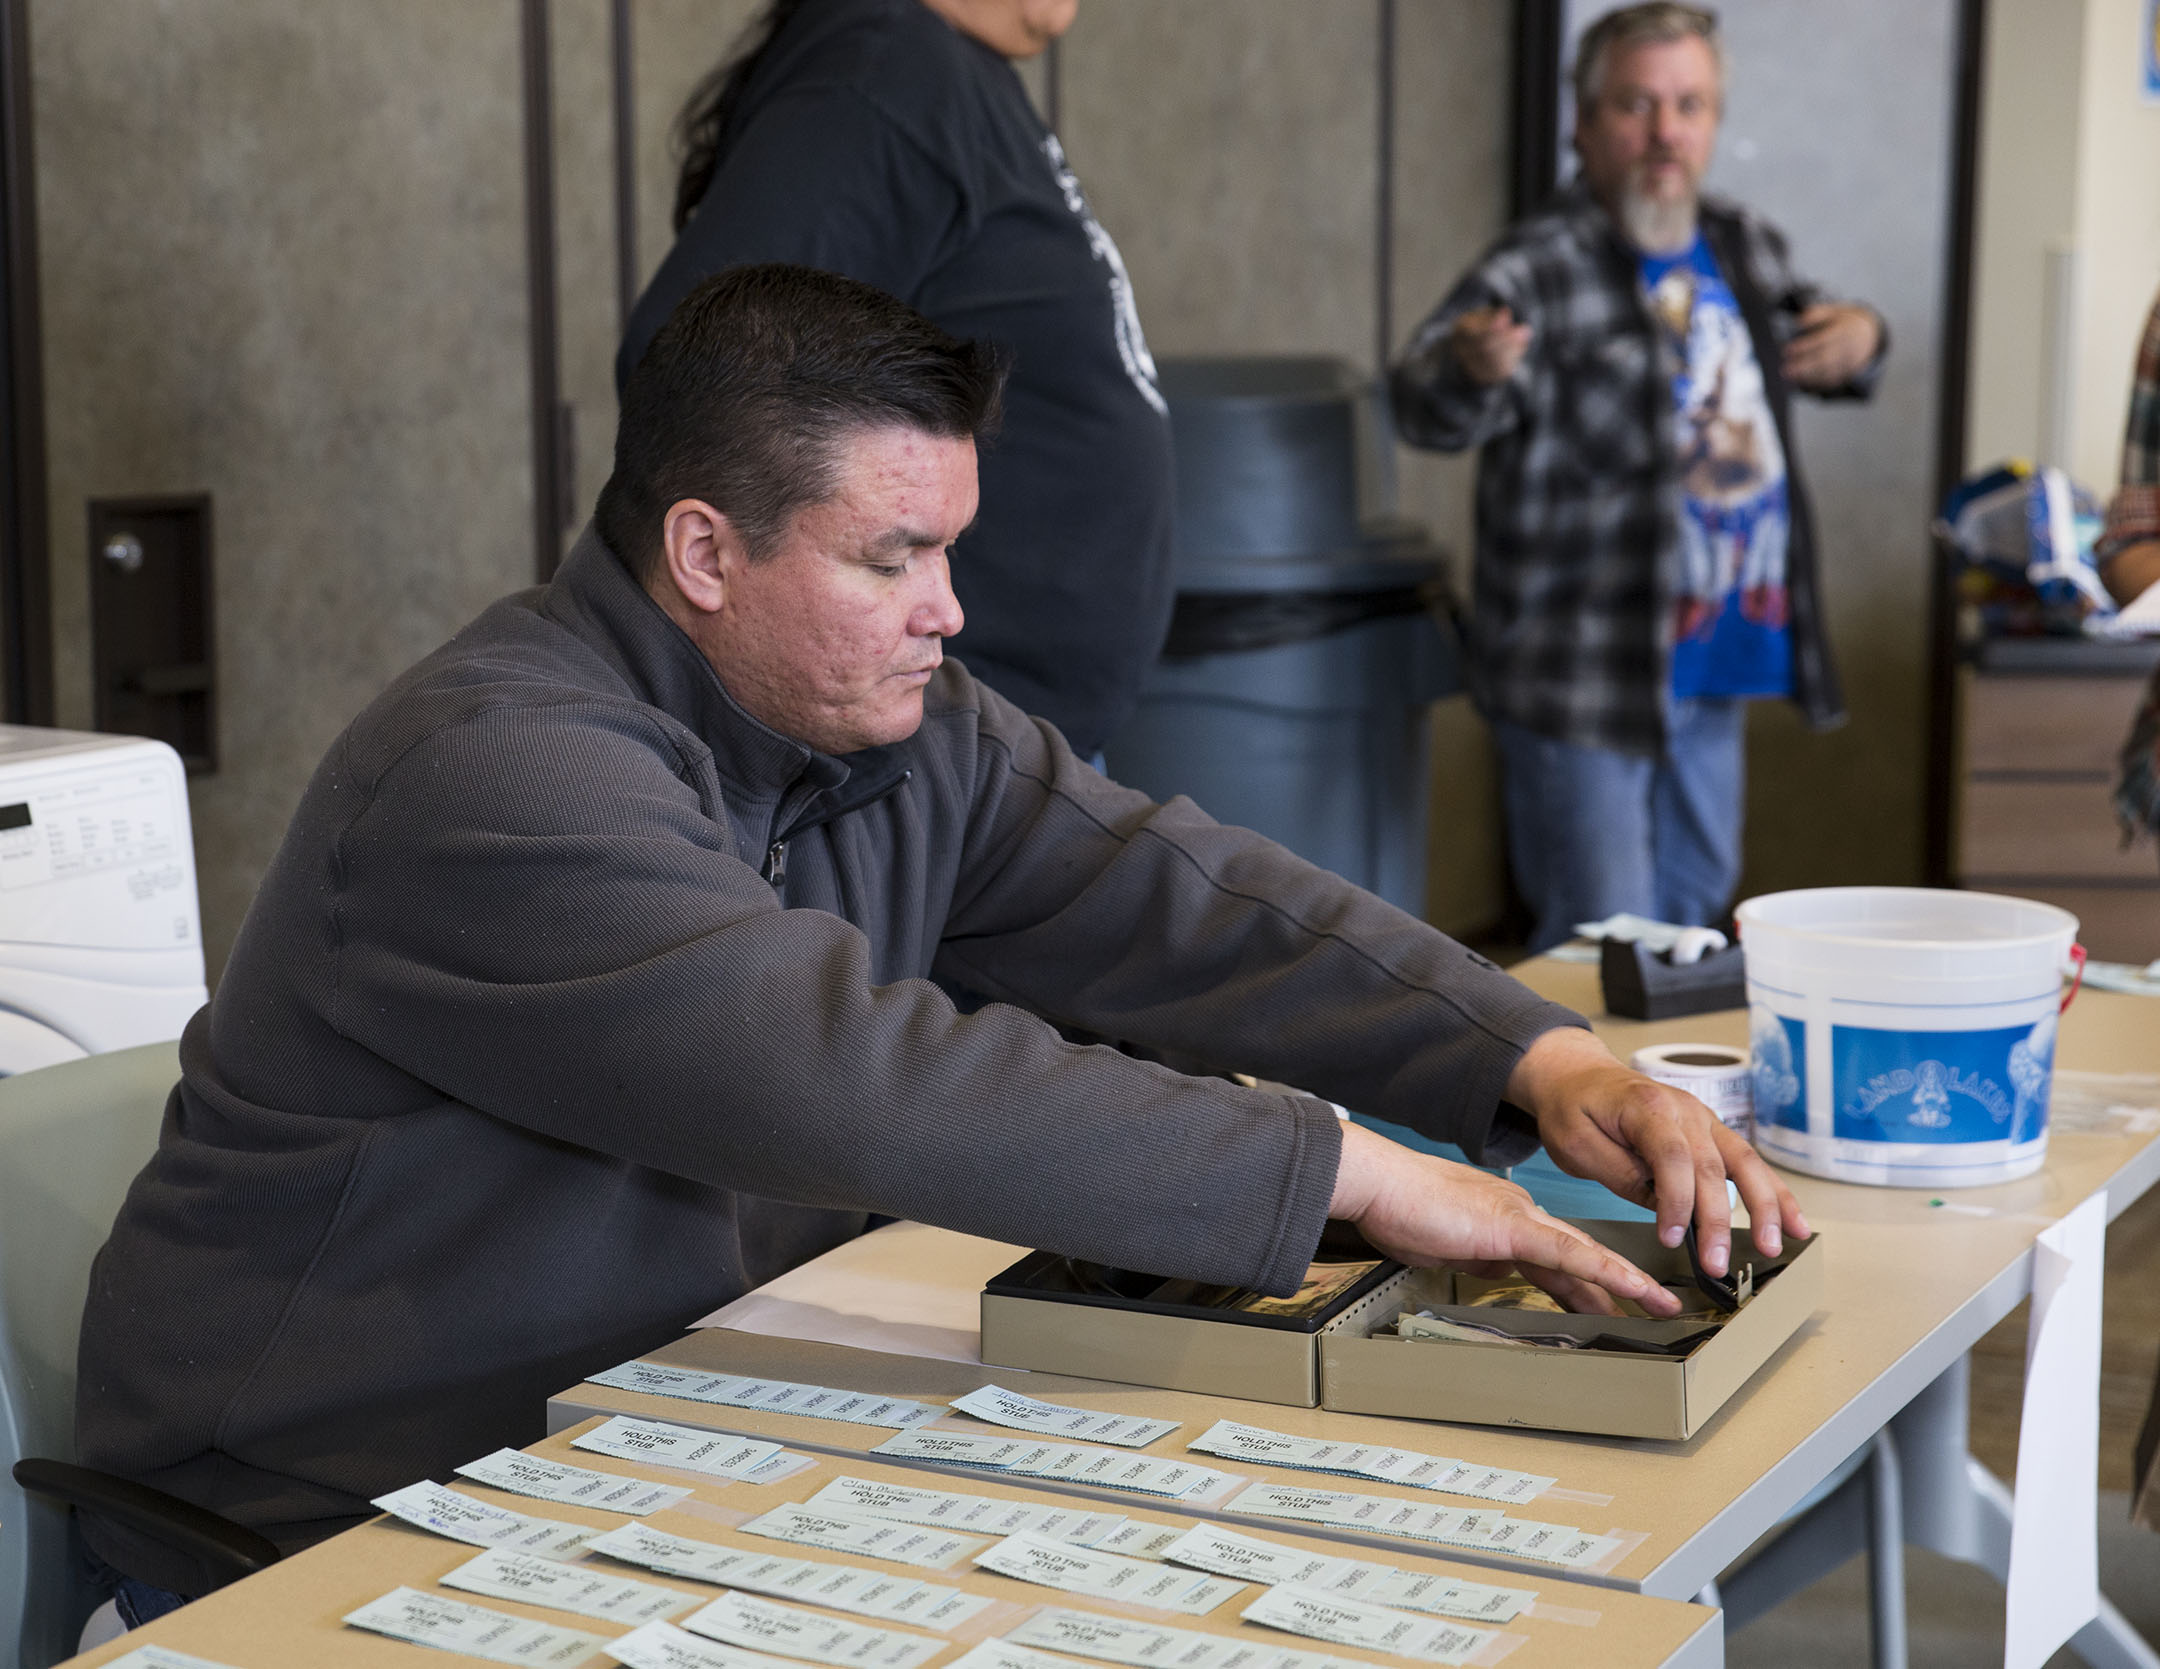 Wes Headdress, director of Veterans Affairs for the Fort Peck tribes, sells raffle tickets at a fundraiser on March 22, 2017. The annual event raises money to help pay for veterans’ transportation and hotel when they travel off the reservation for medical care.